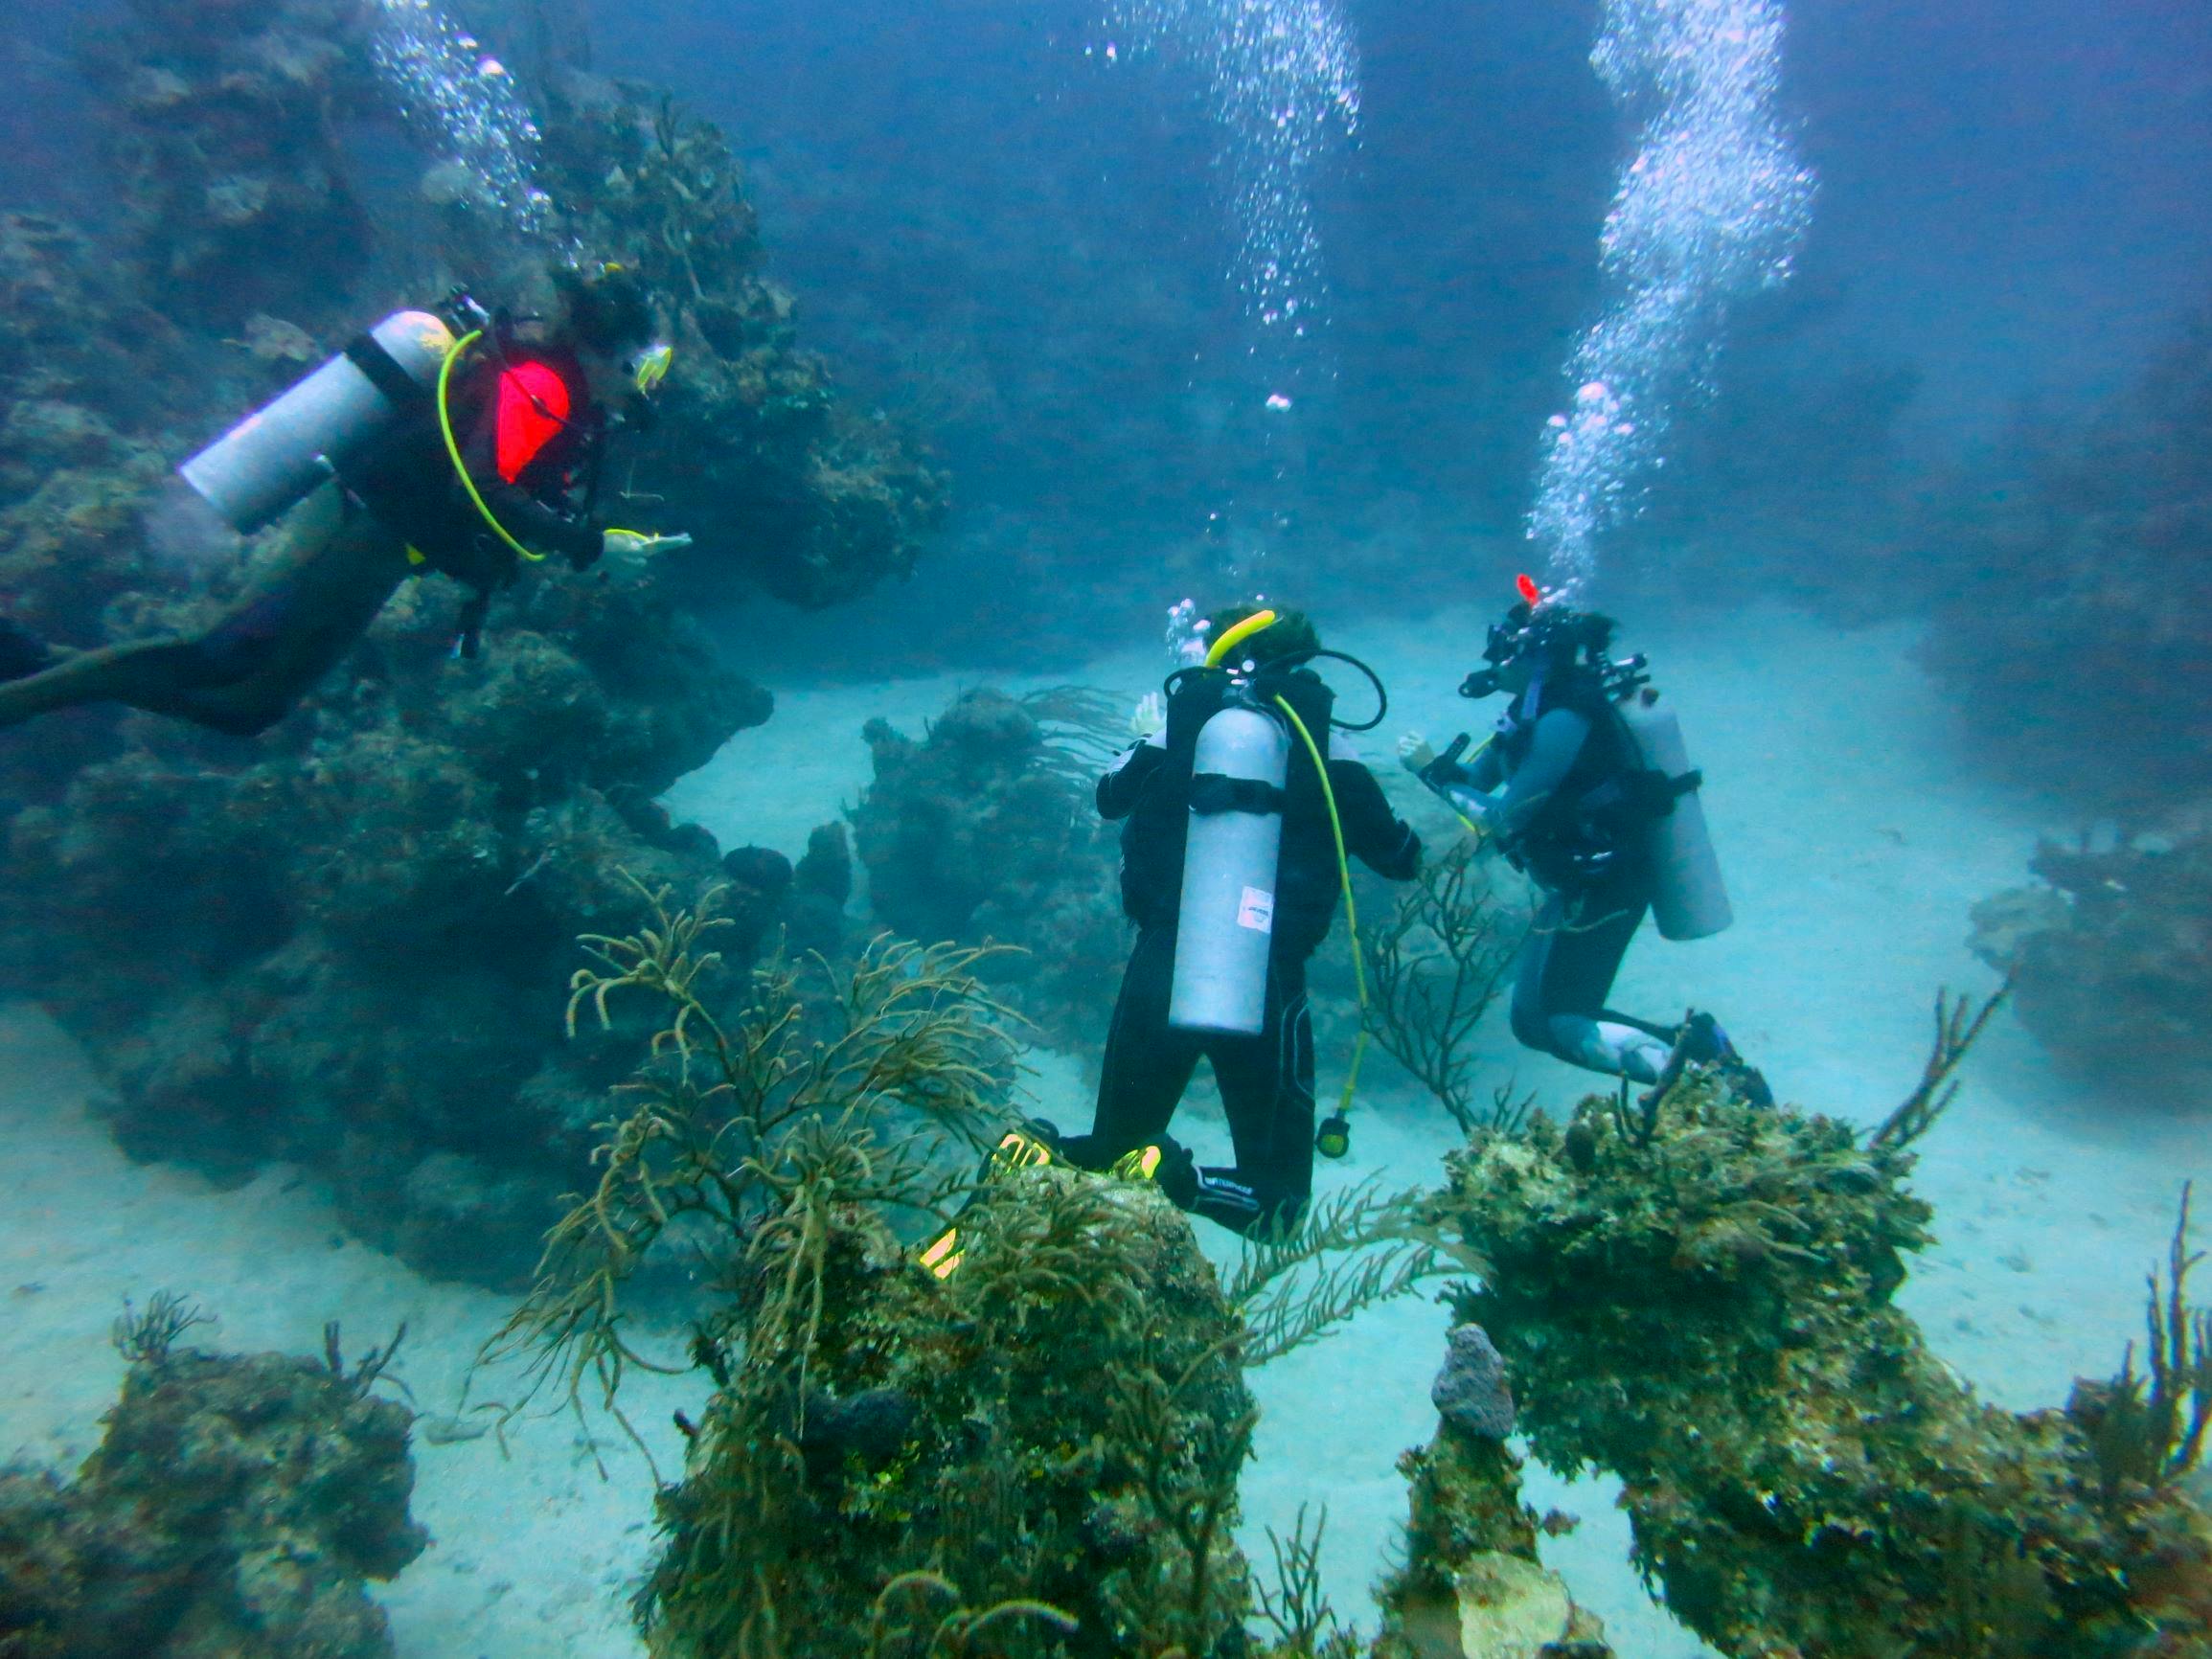 IV. How to Get Involved in Conservation Programs as a Diver